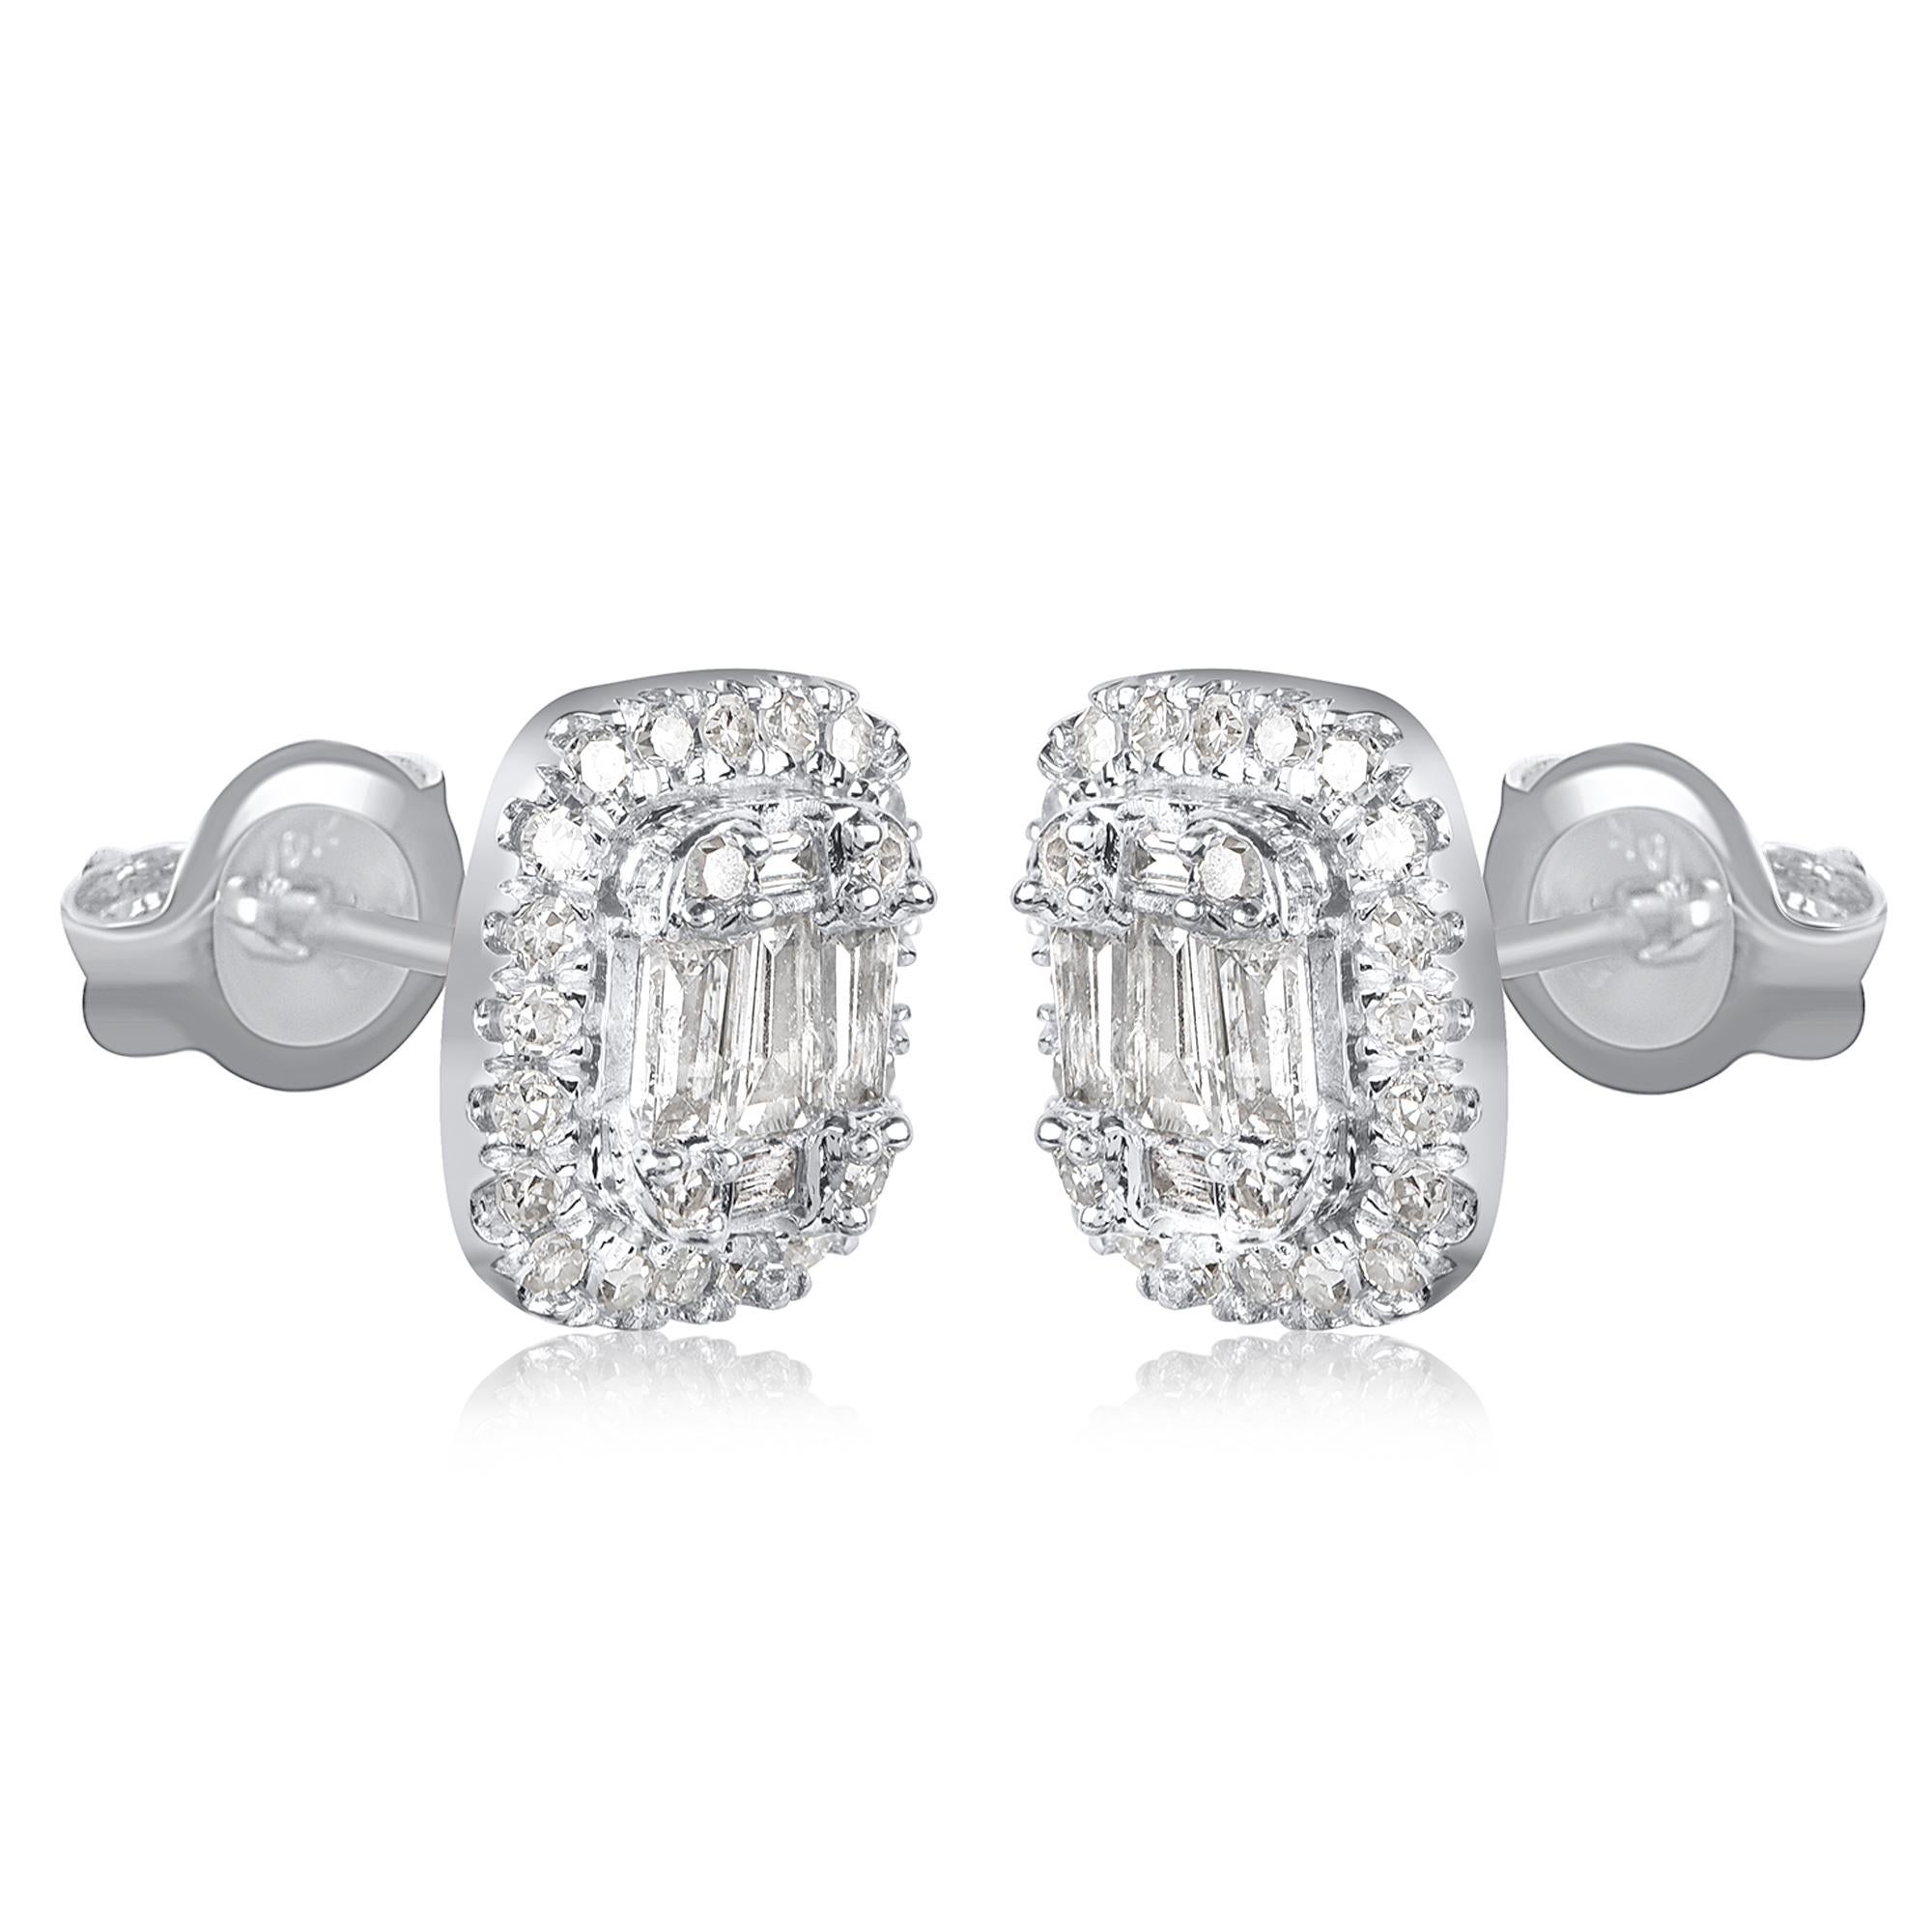 Contemporary TJD 0.25 Carat Round & Baguette Diamond 14KT White Gold Halo Stud Earrings For Sale